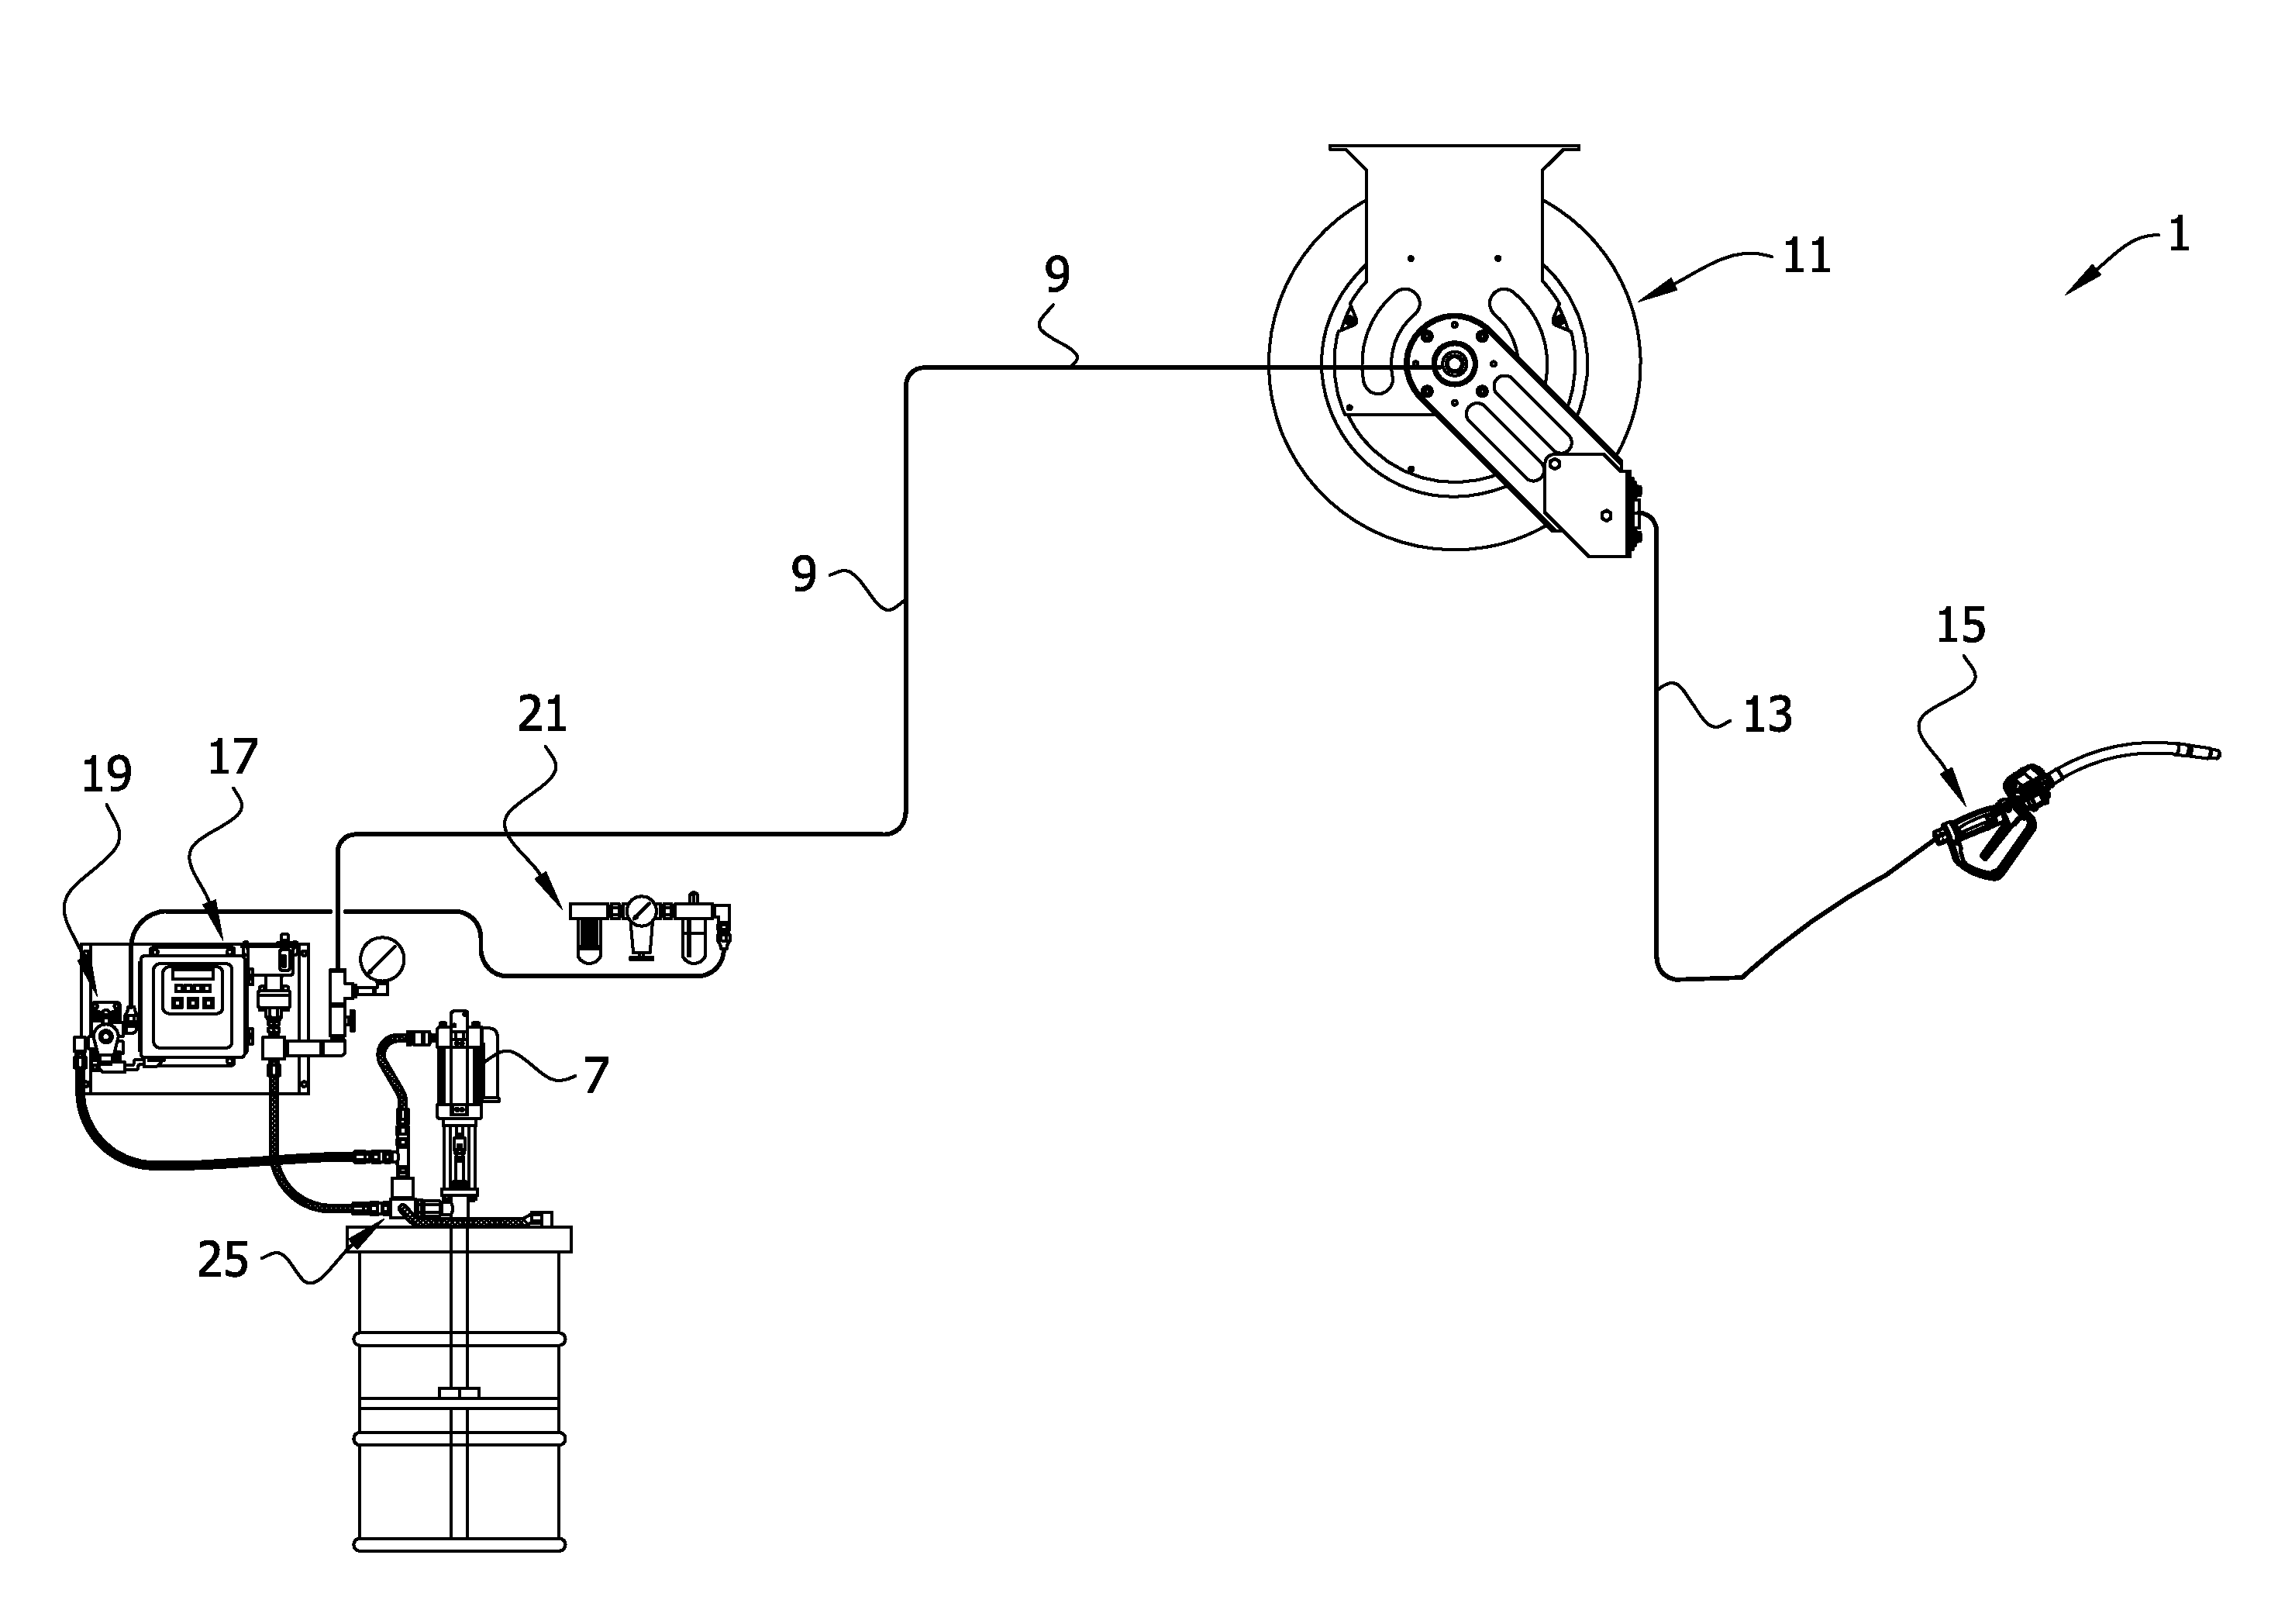 Method and Apparatus for Measuring Apparent Viscosity of a Non-Newtonian Fluid